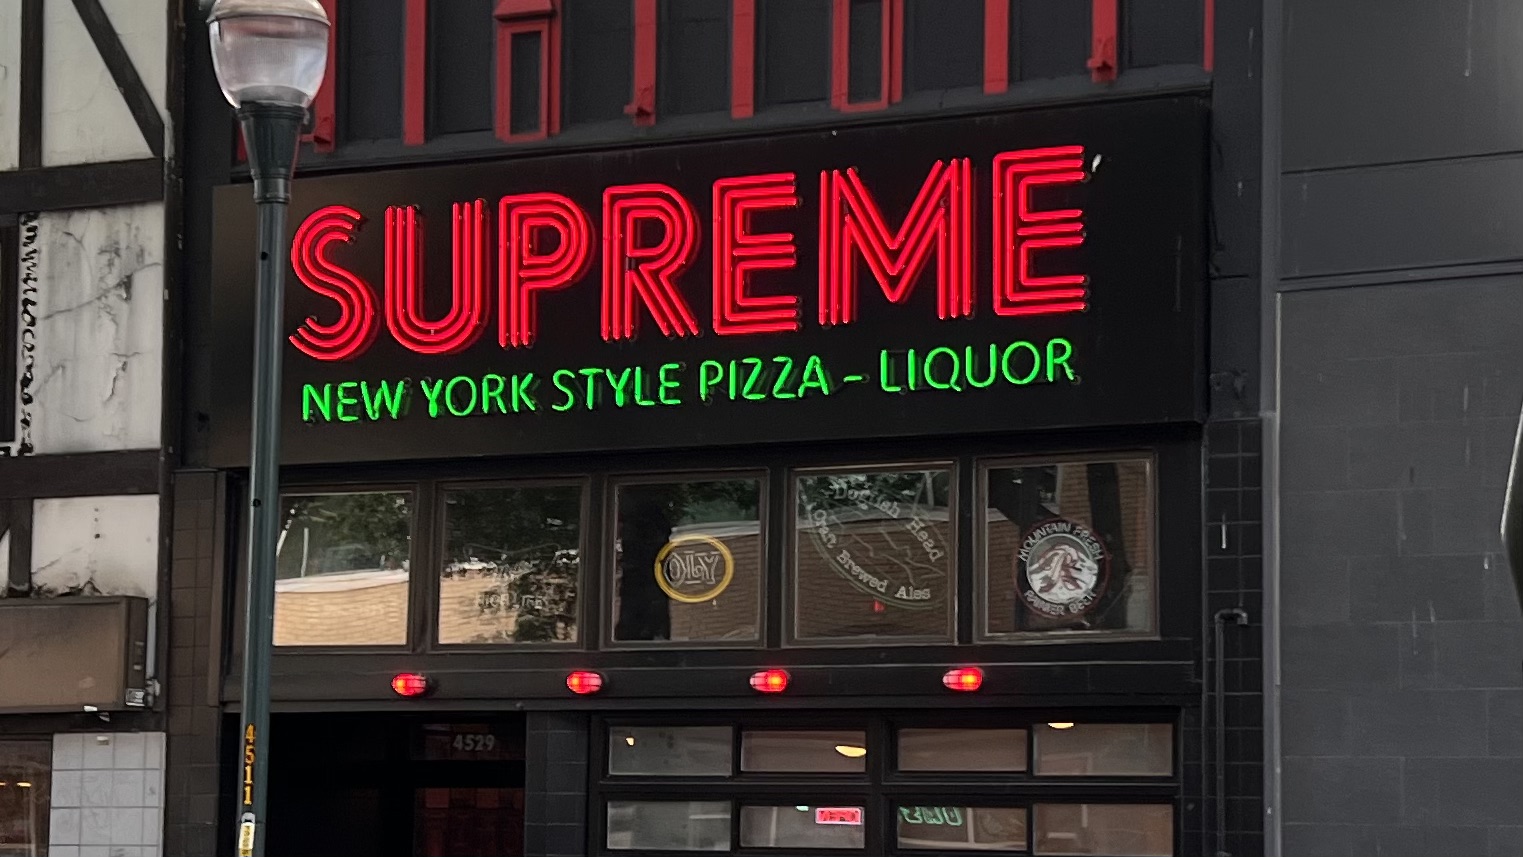 A photo of a restaurant storefront reading Supreme: New York Style Pizza-Liquor, but the dash between pizza and liquor could be mistaken for a hyphen